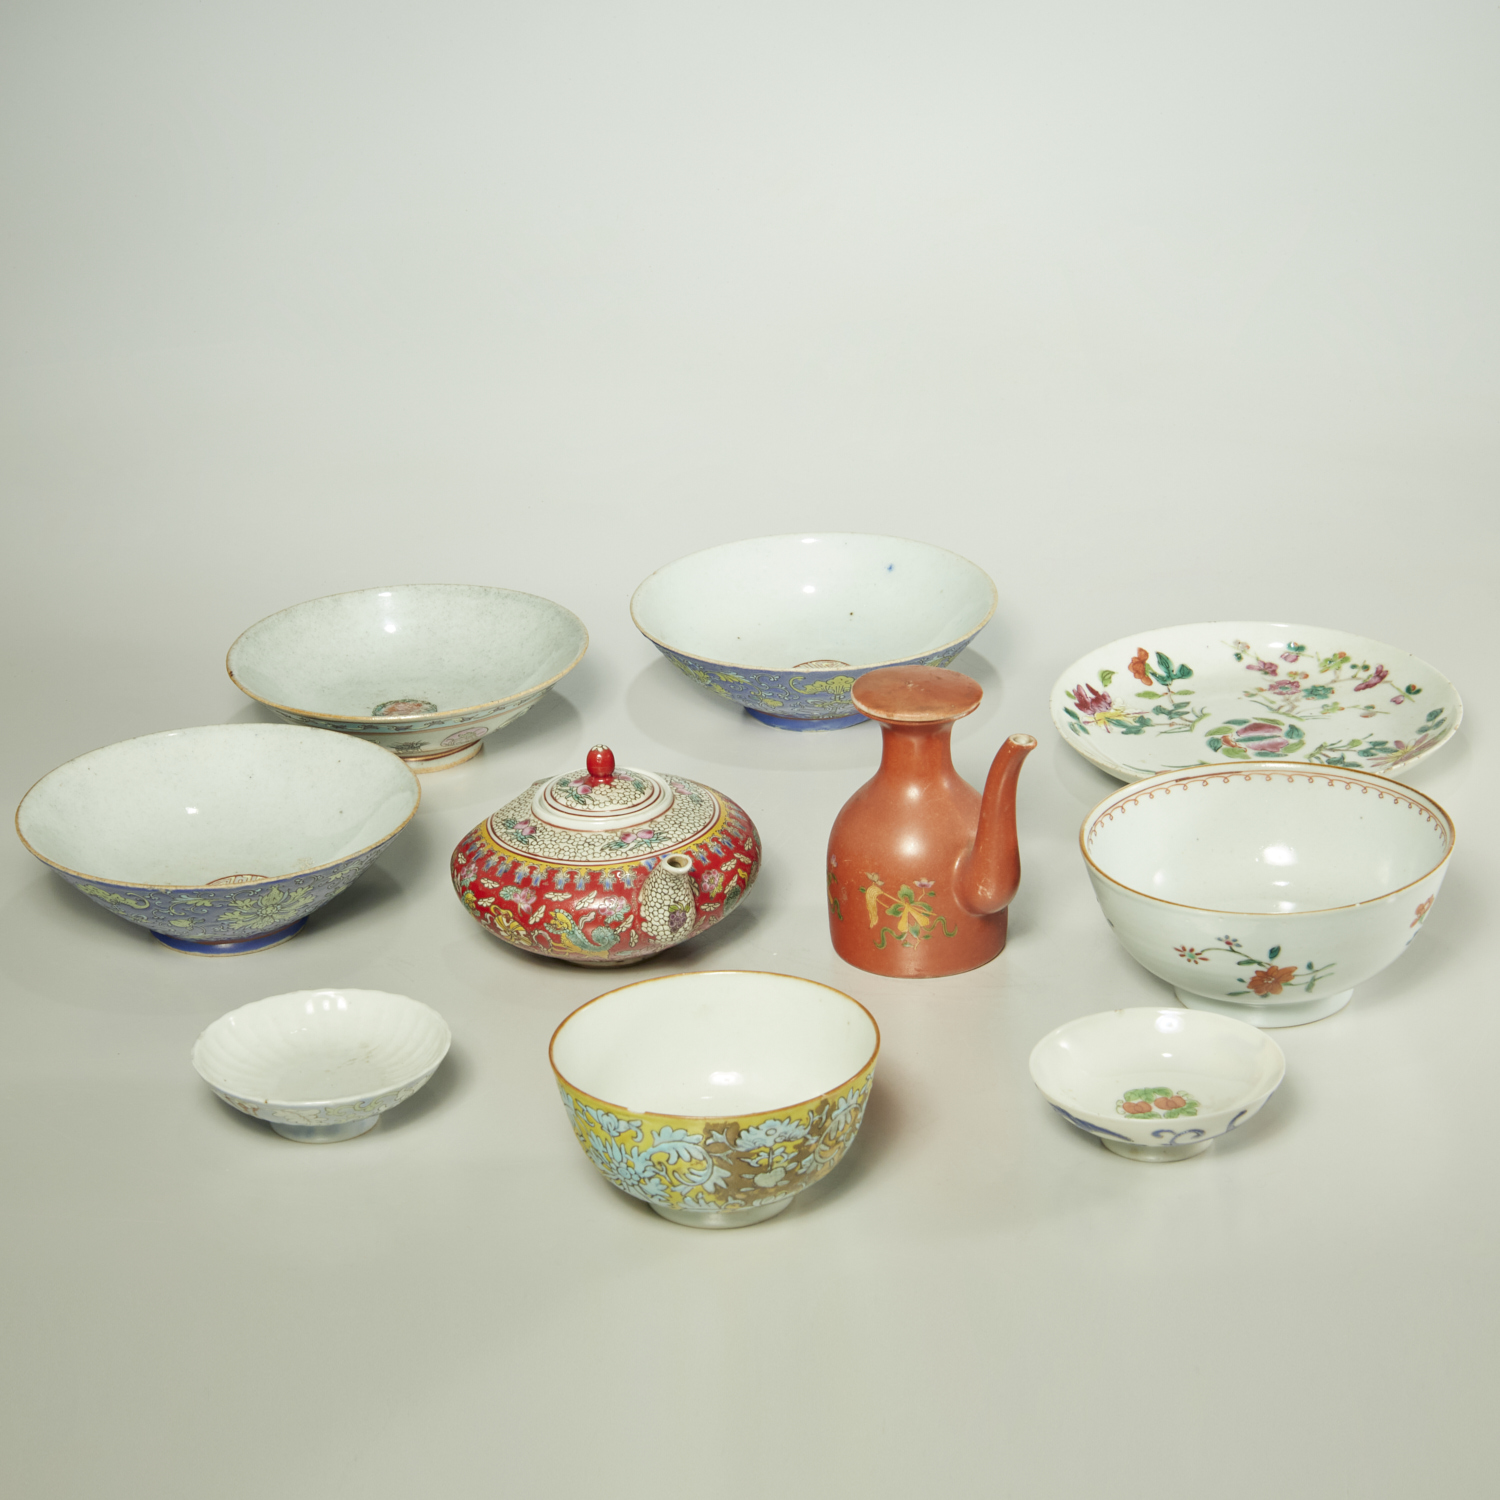 GROUP 10 CHINESE PORCELAIN TABLE 3611c5